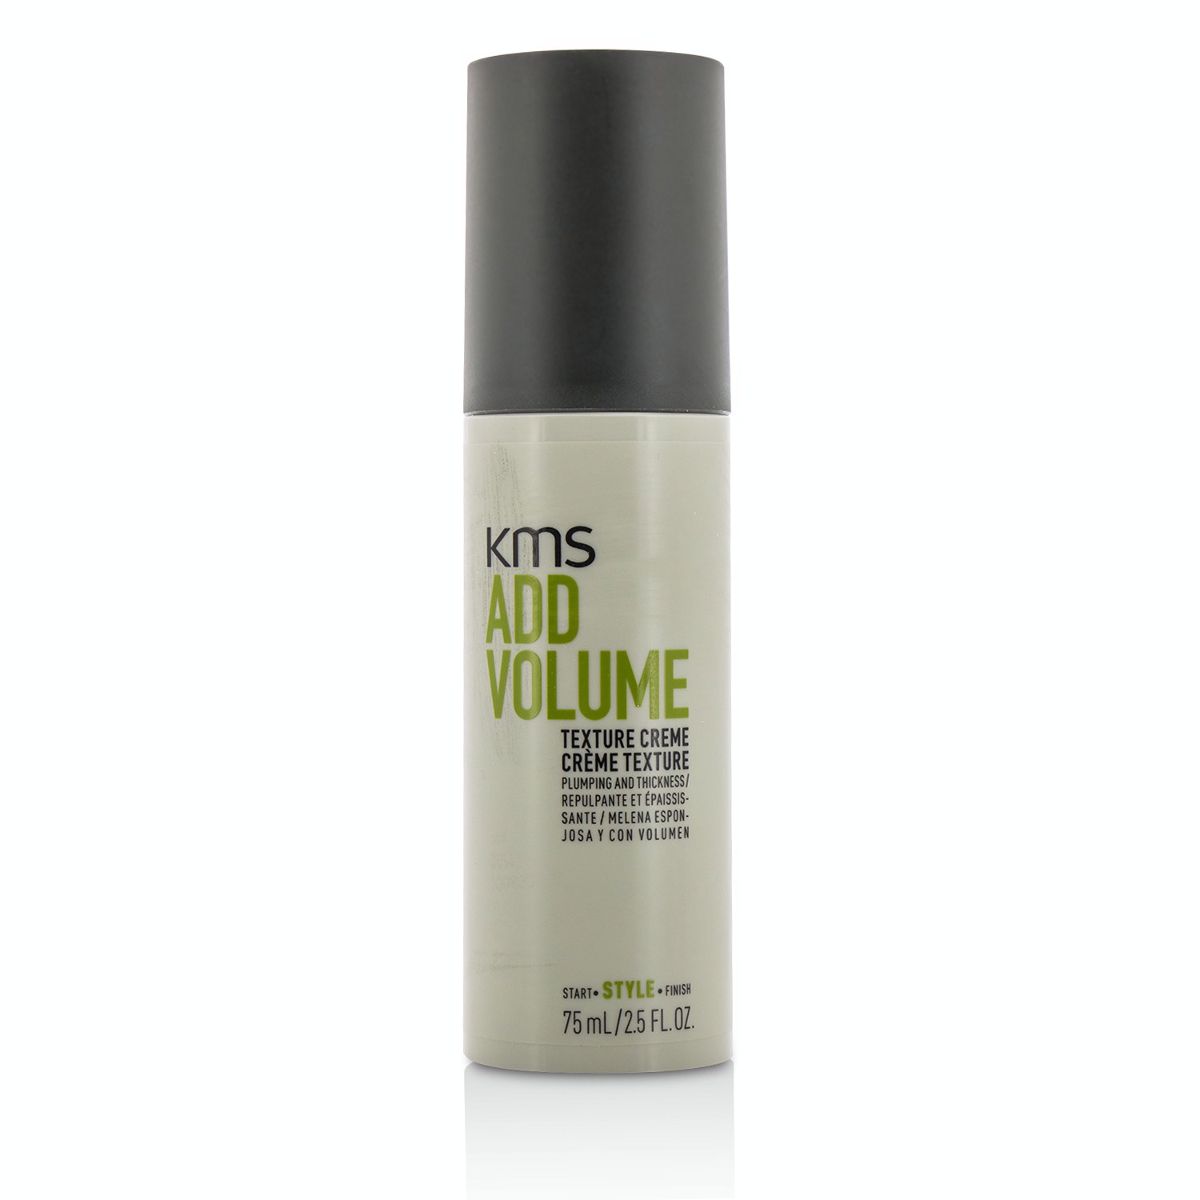 Add Volume Texture Creme (Plumping and Thickness) KMS California Image